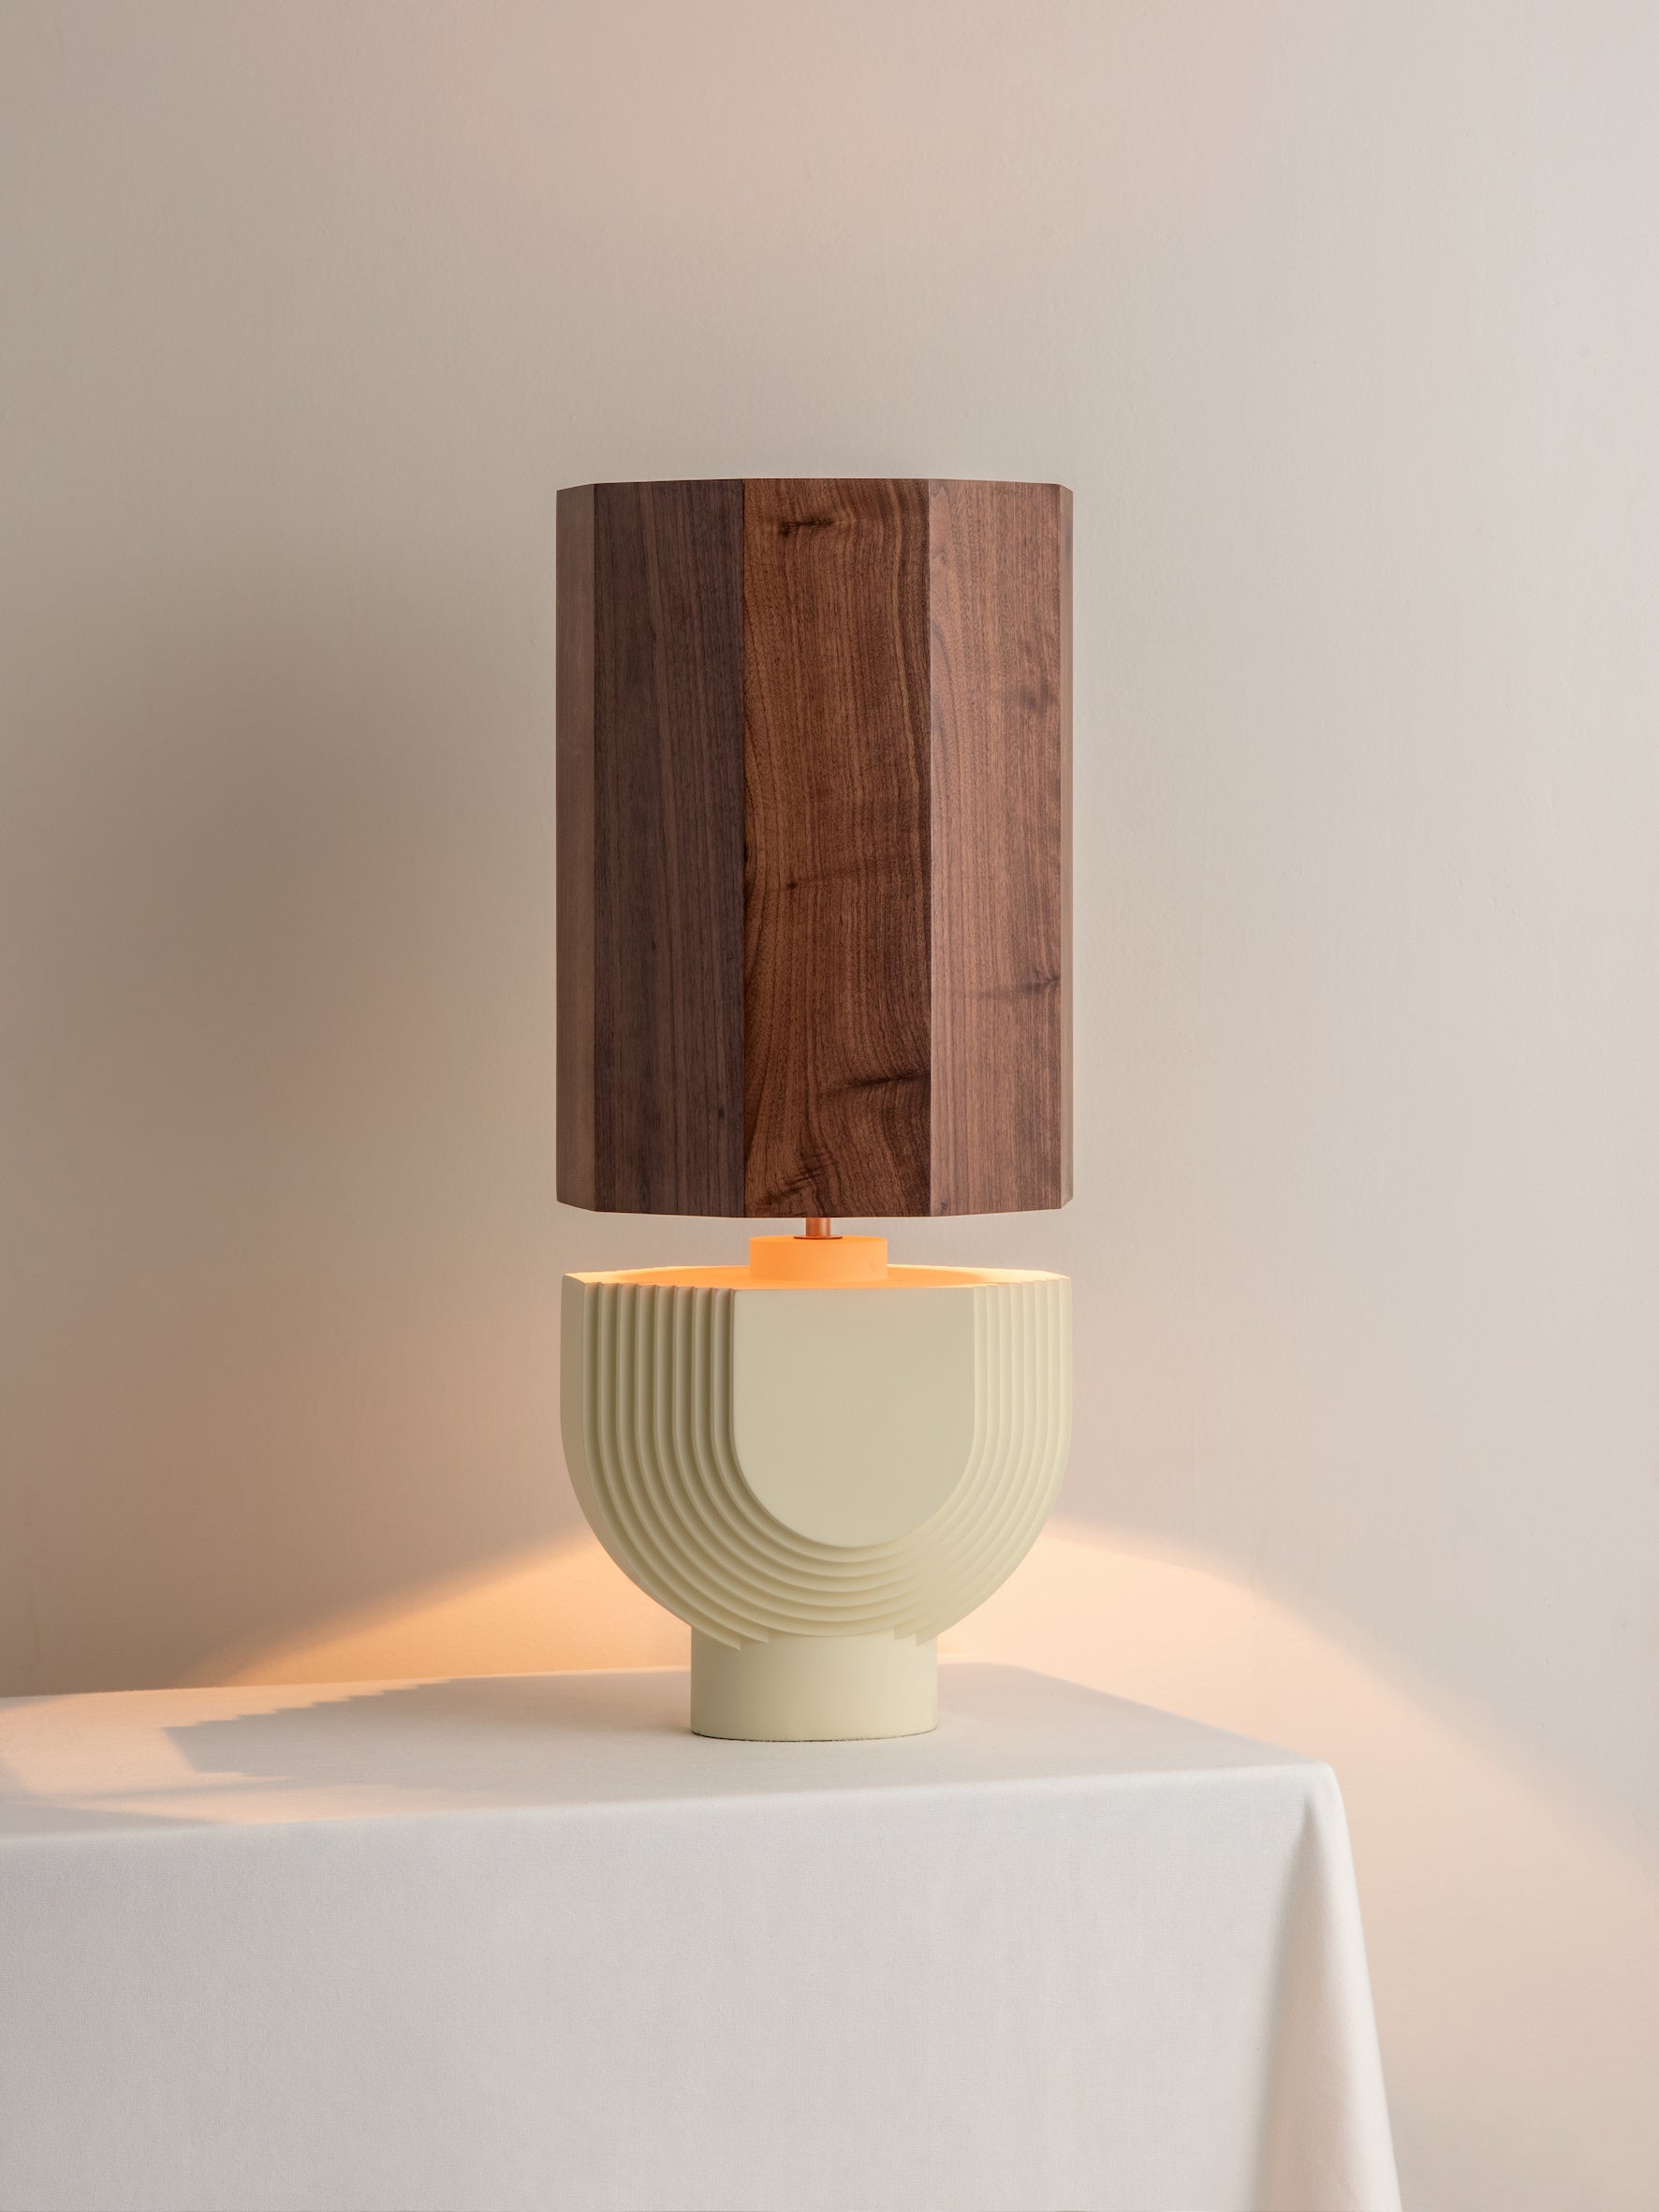 Editions concrete lamp with + walnut wood shade | Table Lamp | Lights & Lamps | UK | Modern Affordable Designer Lighting